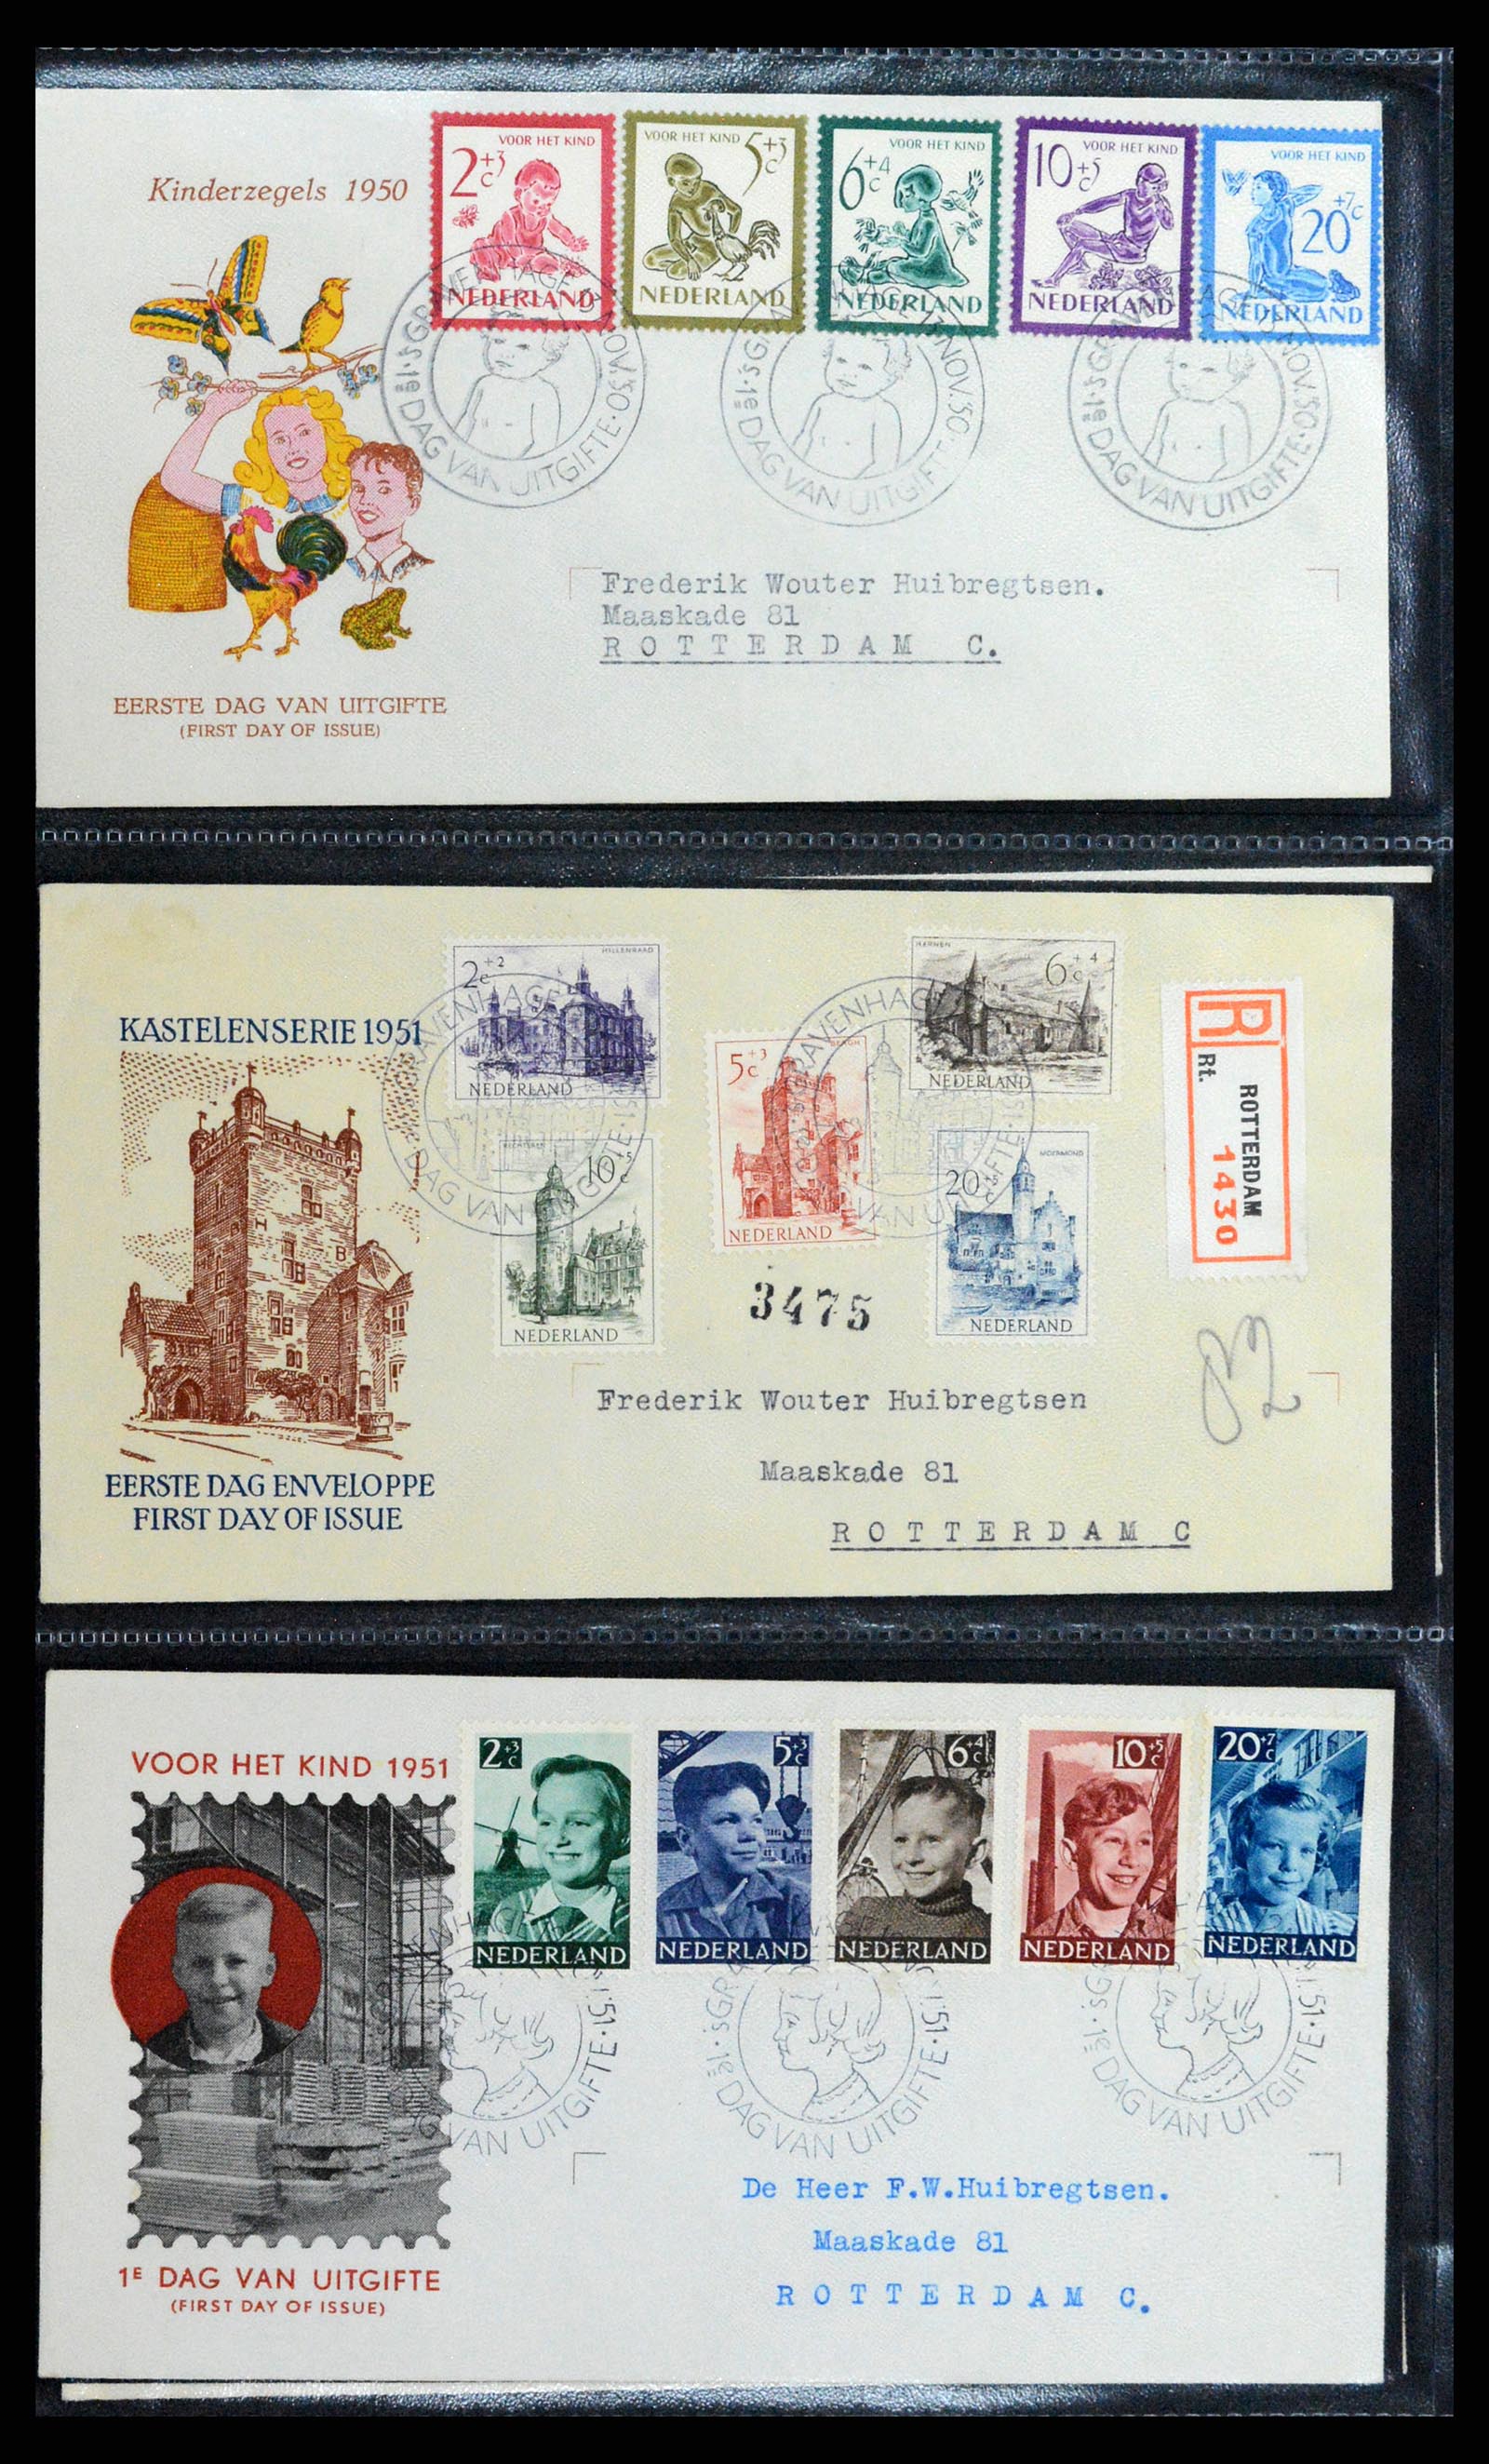 37710 004 - Stamp collection 37710 Netherlands FDC's 1949-1976.